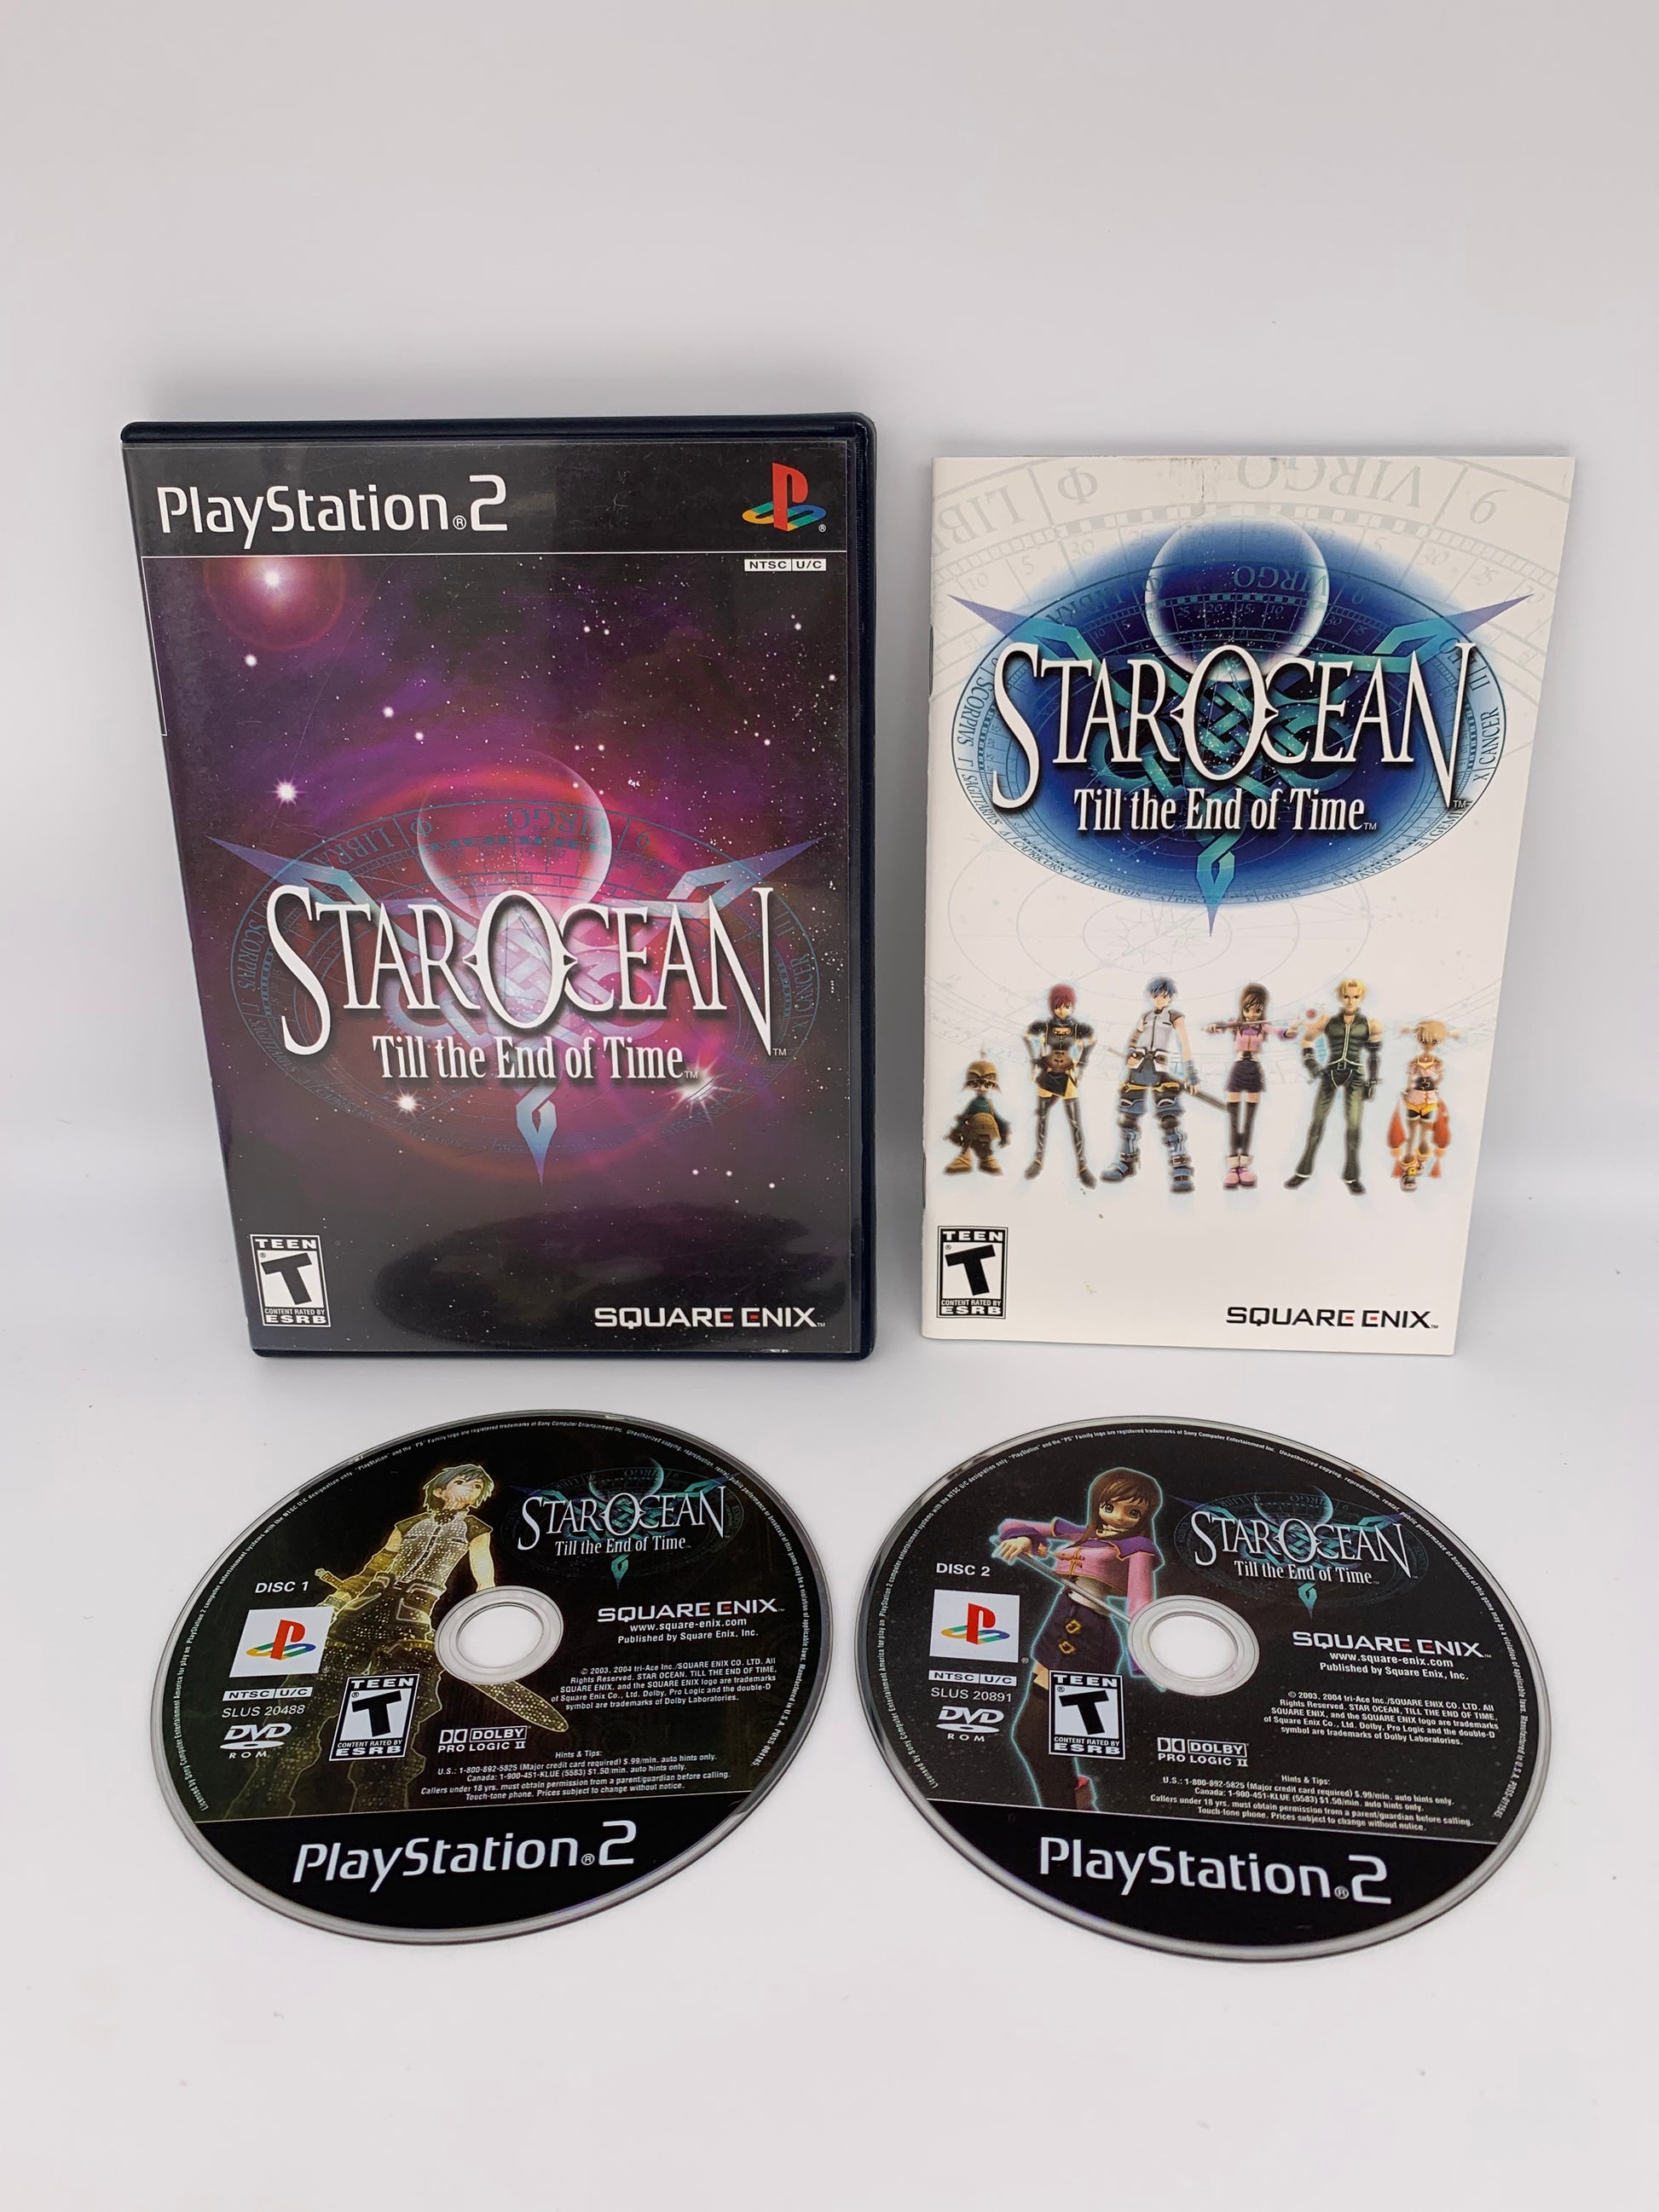 PiXEL-RETRO.COM : SONY PLAYSTATION 2 (PS2) COMPLET CIB BOX MANUAL GAME NTSC STAR OCEAN TILL THE END OF TIME